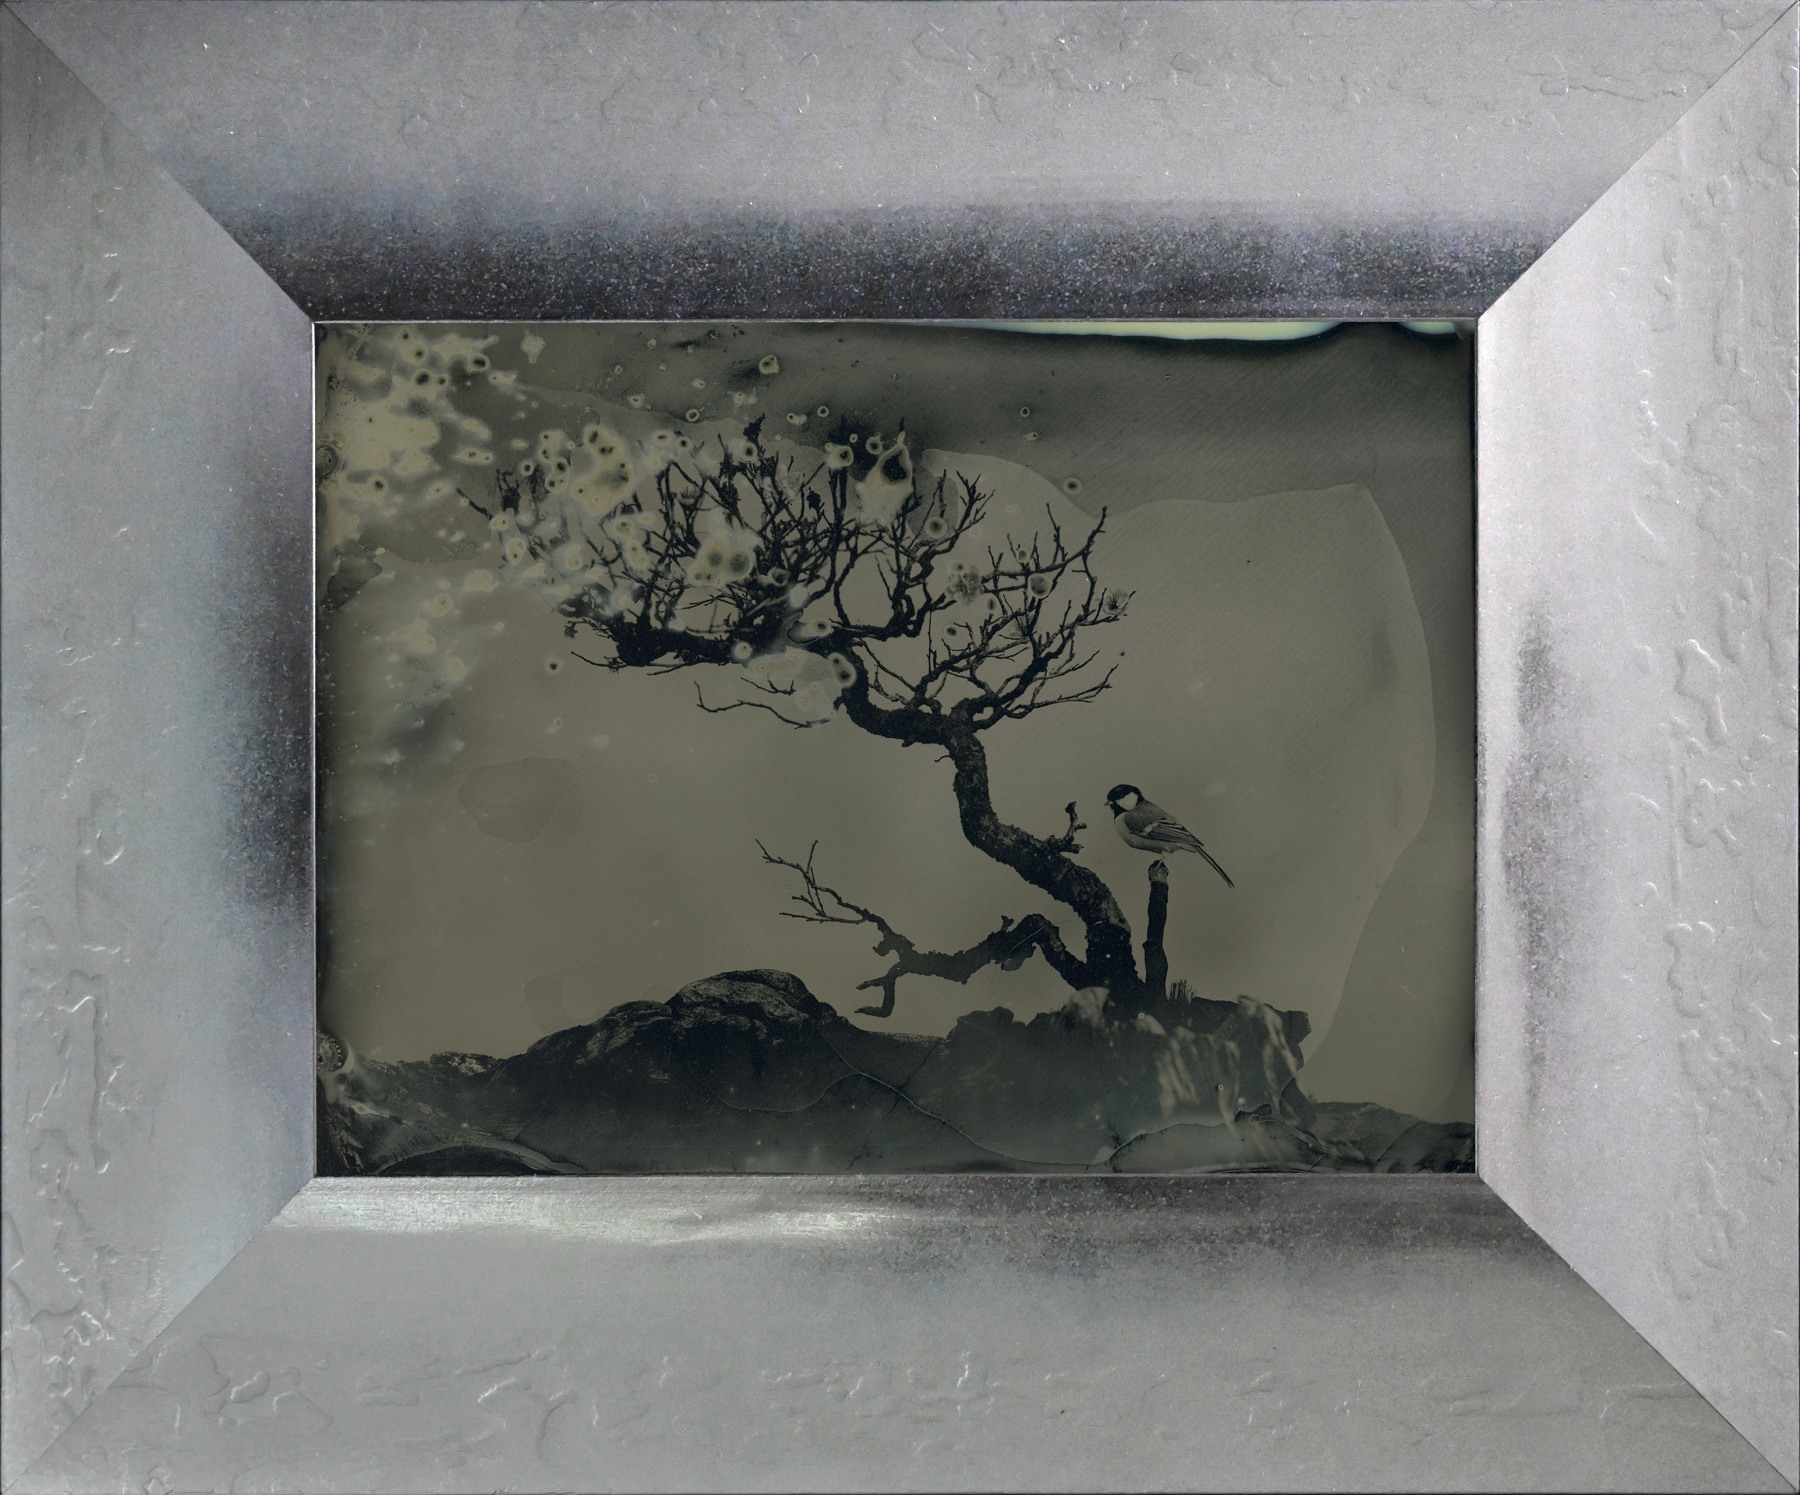 Yamamoto Masao,&nbsp;Untitled (AM #14), 2023. Unique collodion ambrotype, image size: 5 1/8 x 7 inches, frame size: 8 7/8 x 10 11/16 inches.